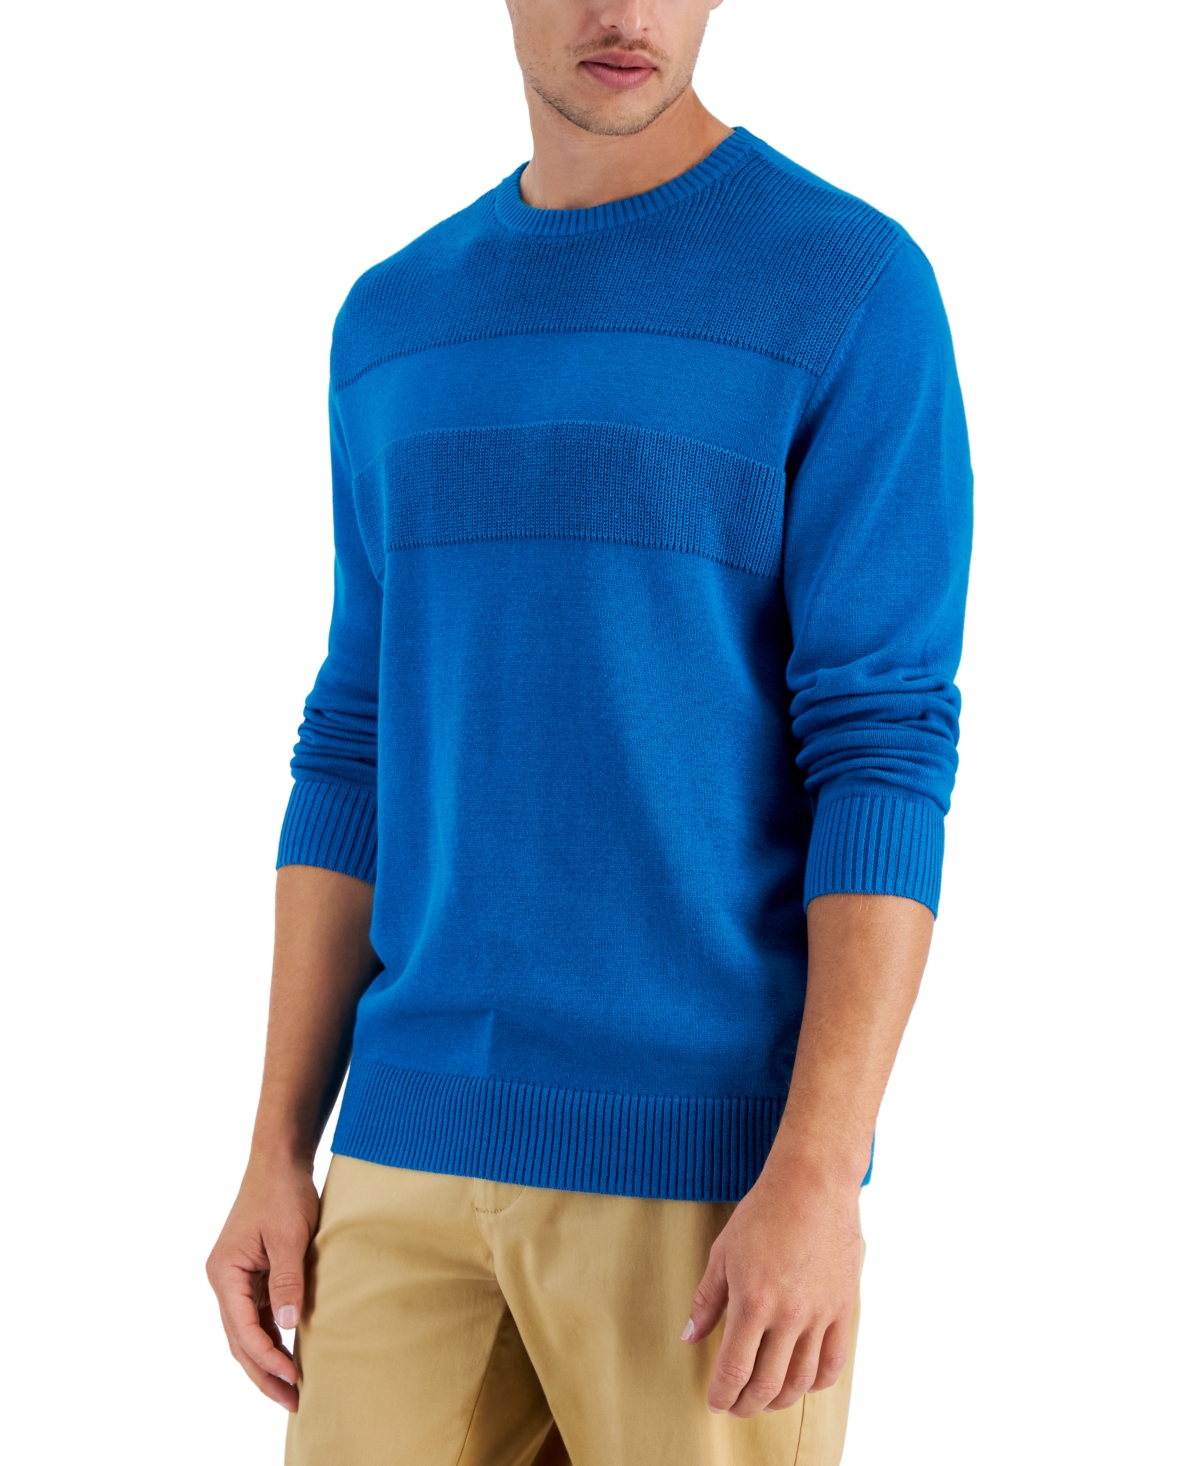 Club Room Men's Textured Cotton Sweater, Created for Macy's